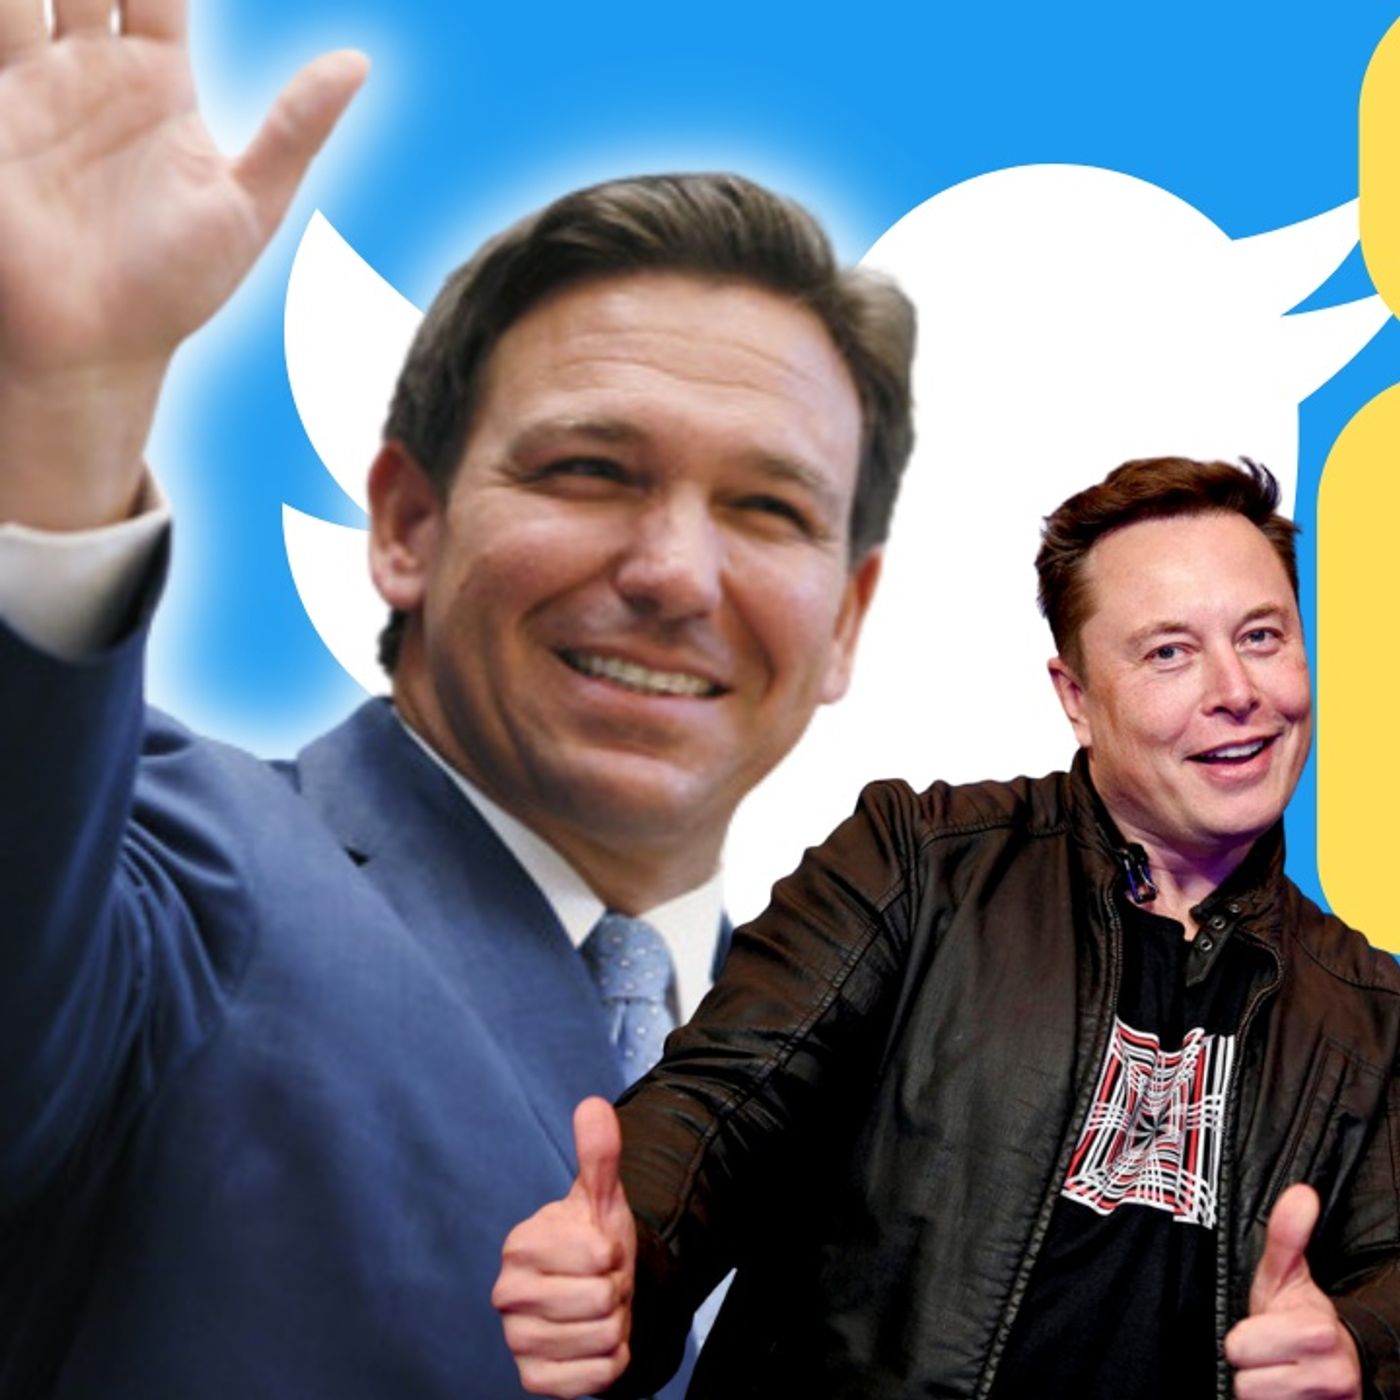 DESANTIS To Announce Presidential Run Live On Twitter With Elon Musk